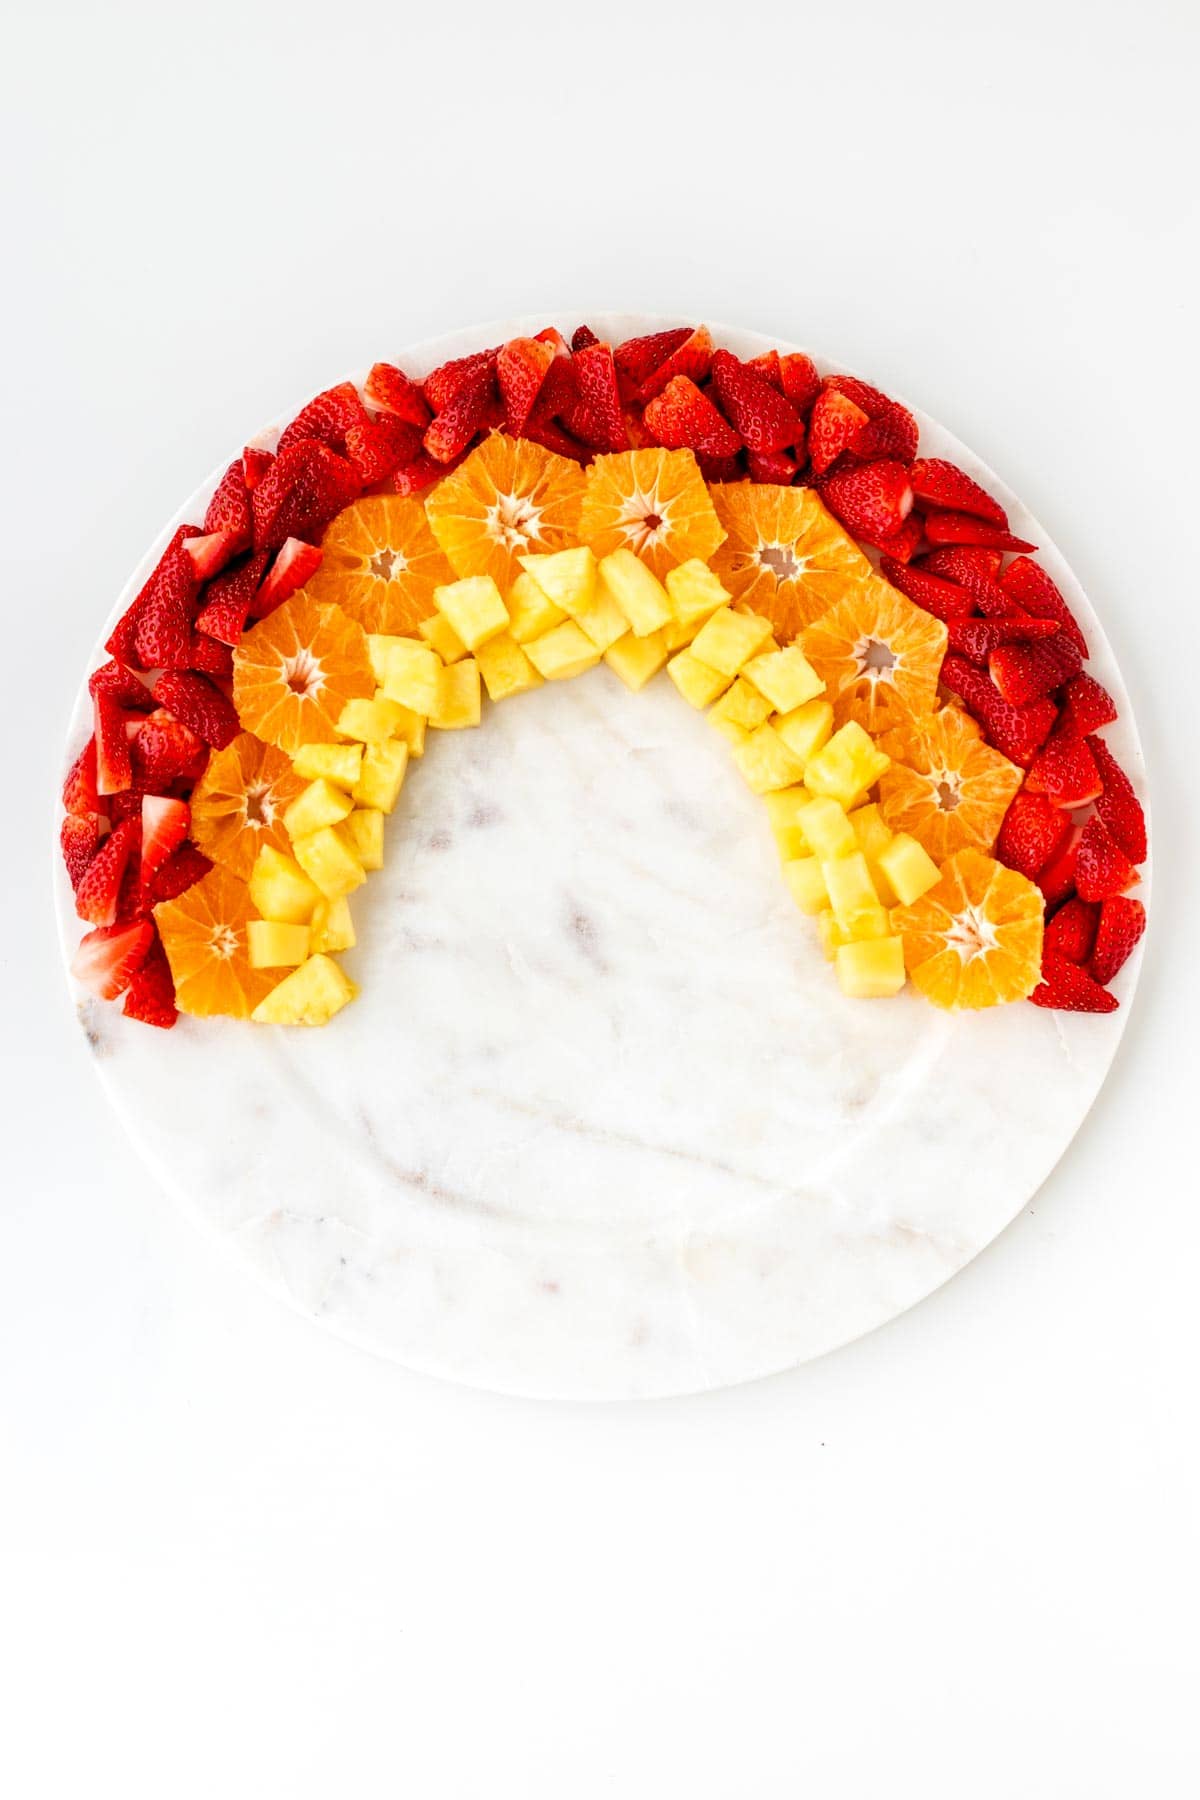 The strawberries, oranges, and pineapple arranged in the shape of a rainbow for the rainbow fruit tray.